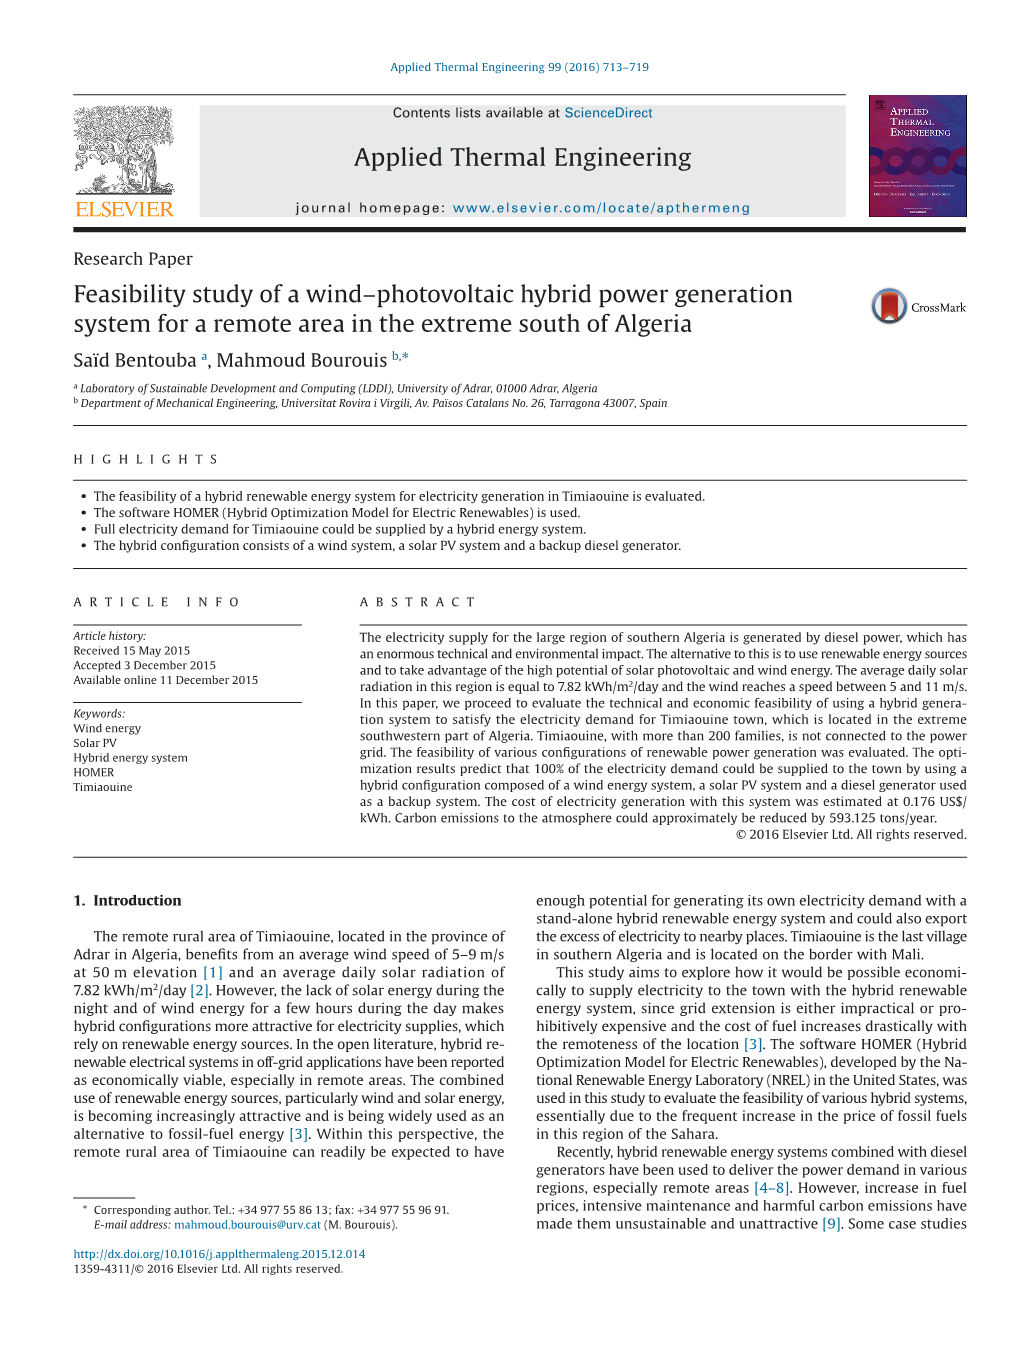 Feasibility Study of a Wind-Photovoltaic Hybrid Power